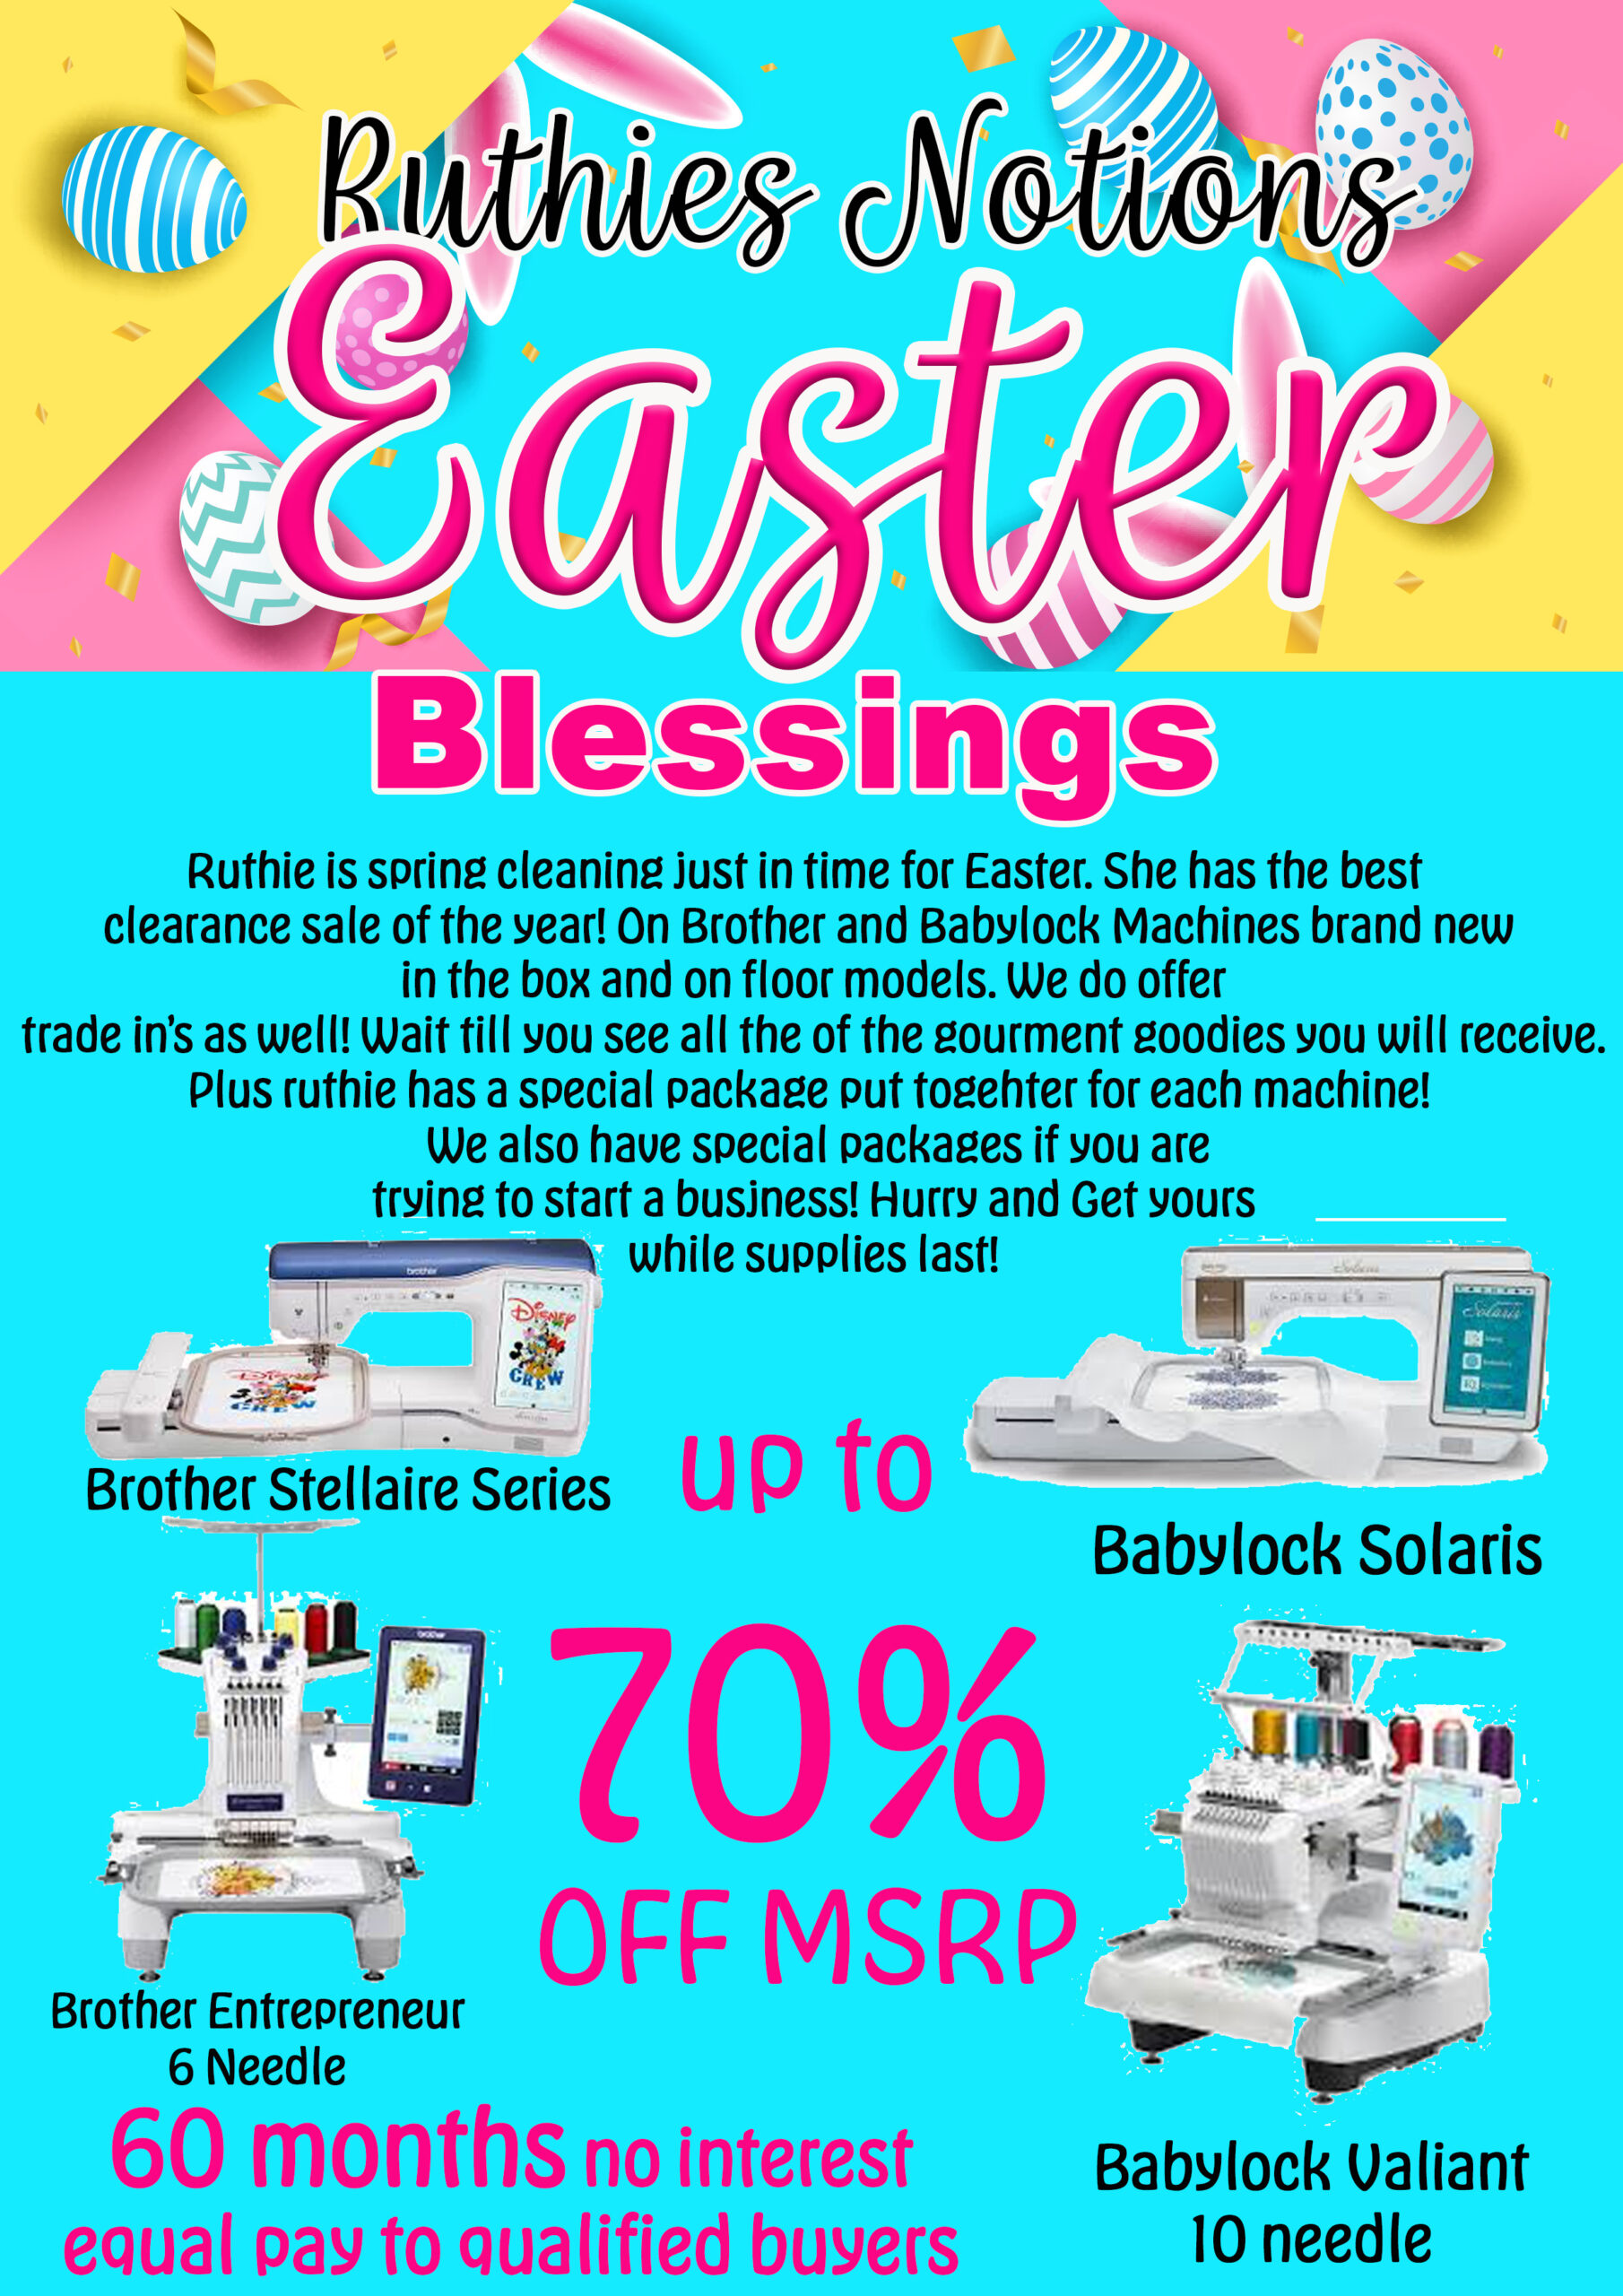 Easter Blessings at Ruthies